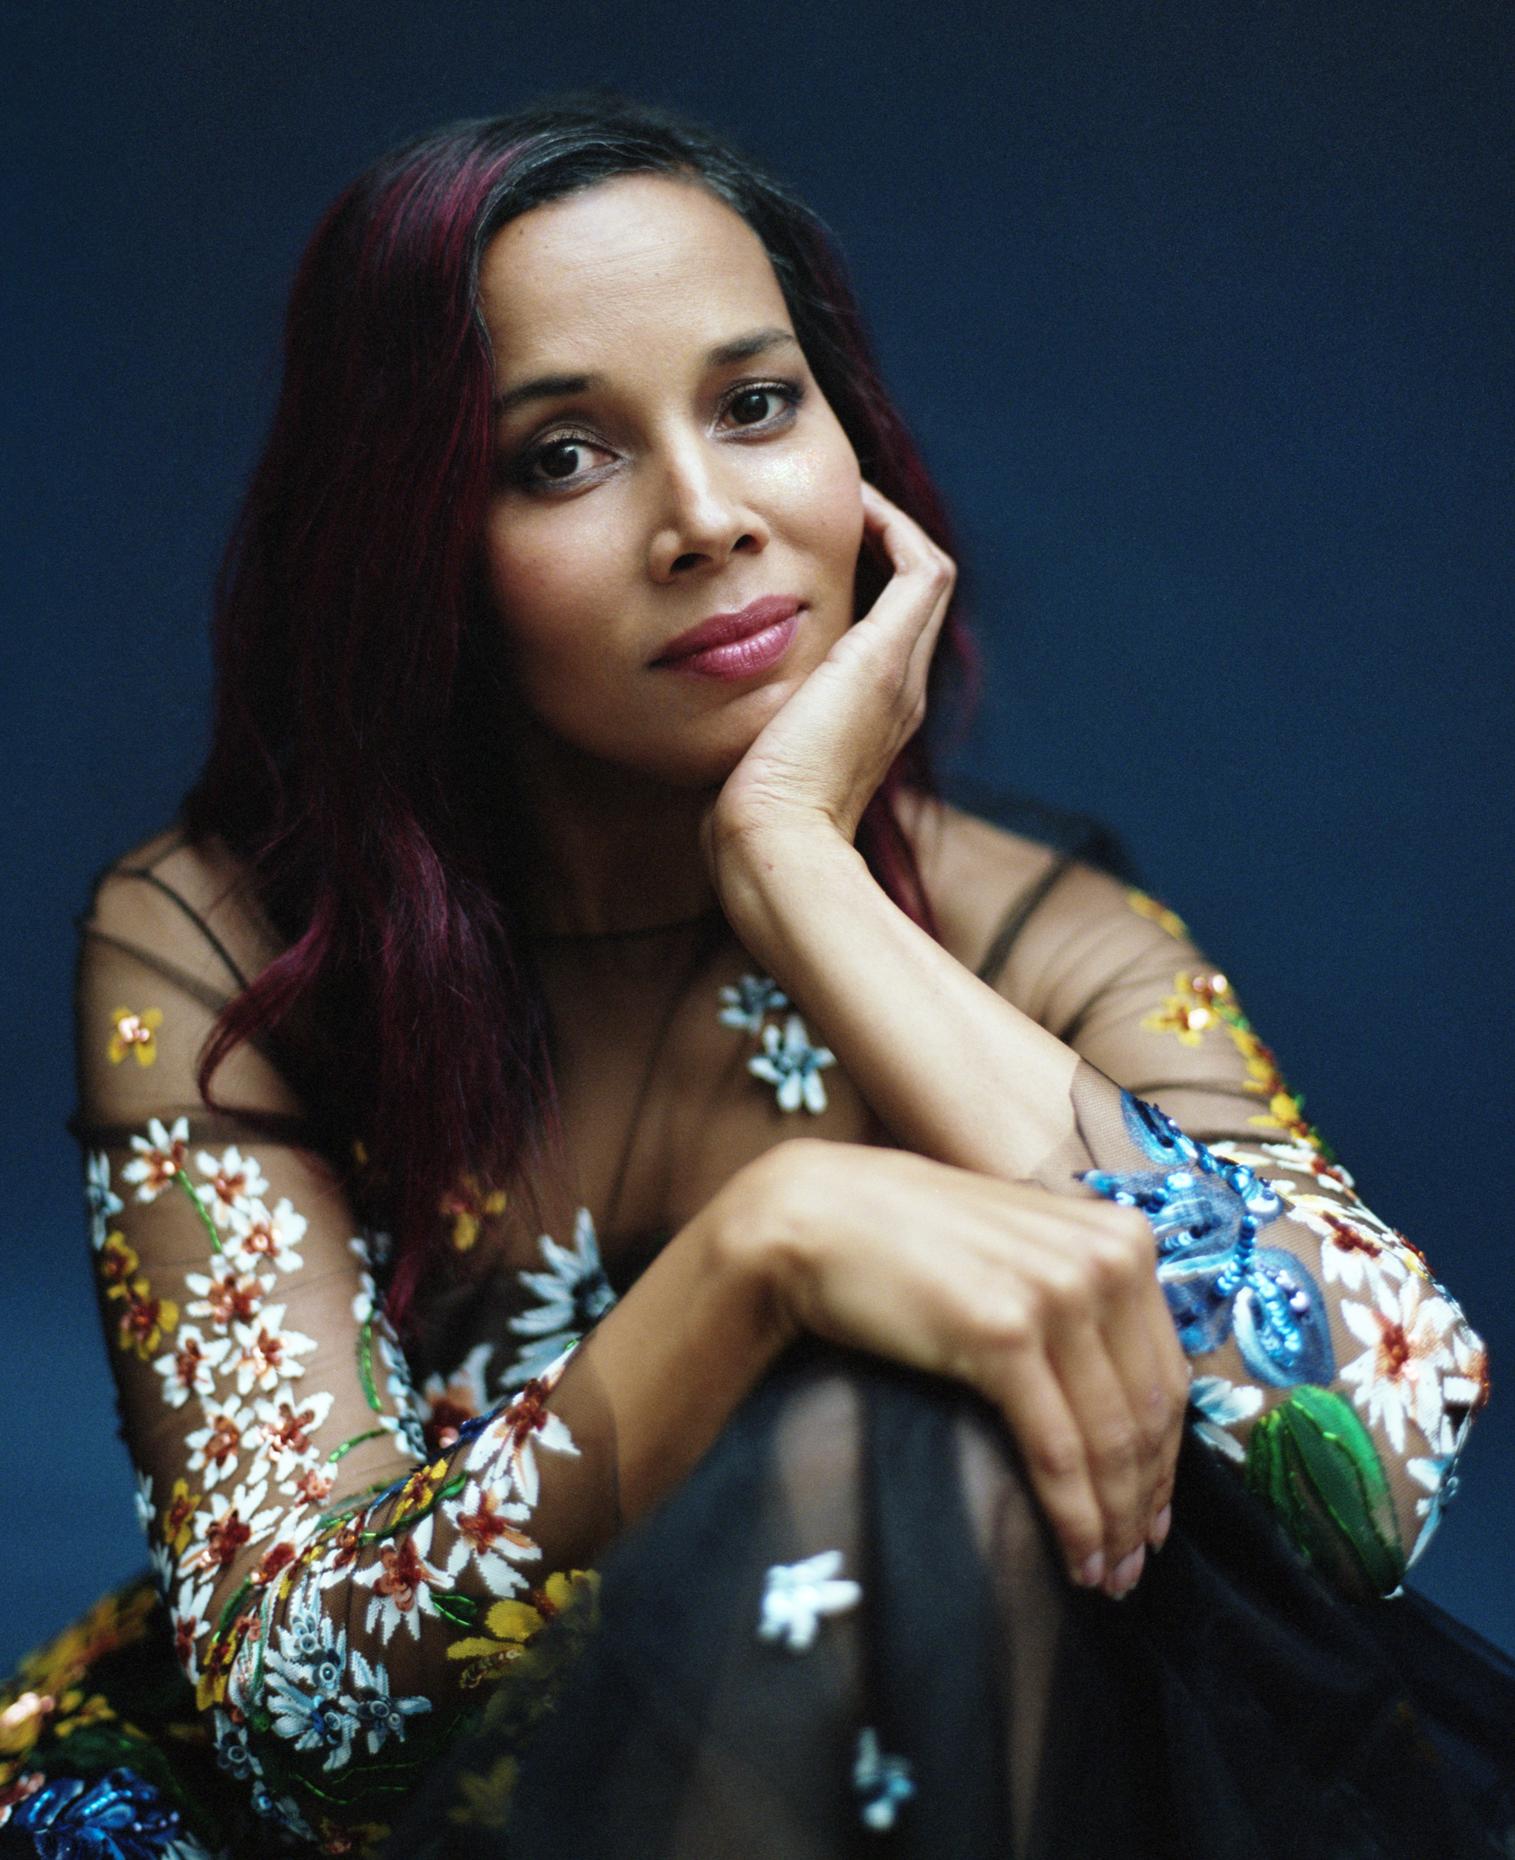 Rhiannon Giddens Returns to All-American Sounds With 'You're the One